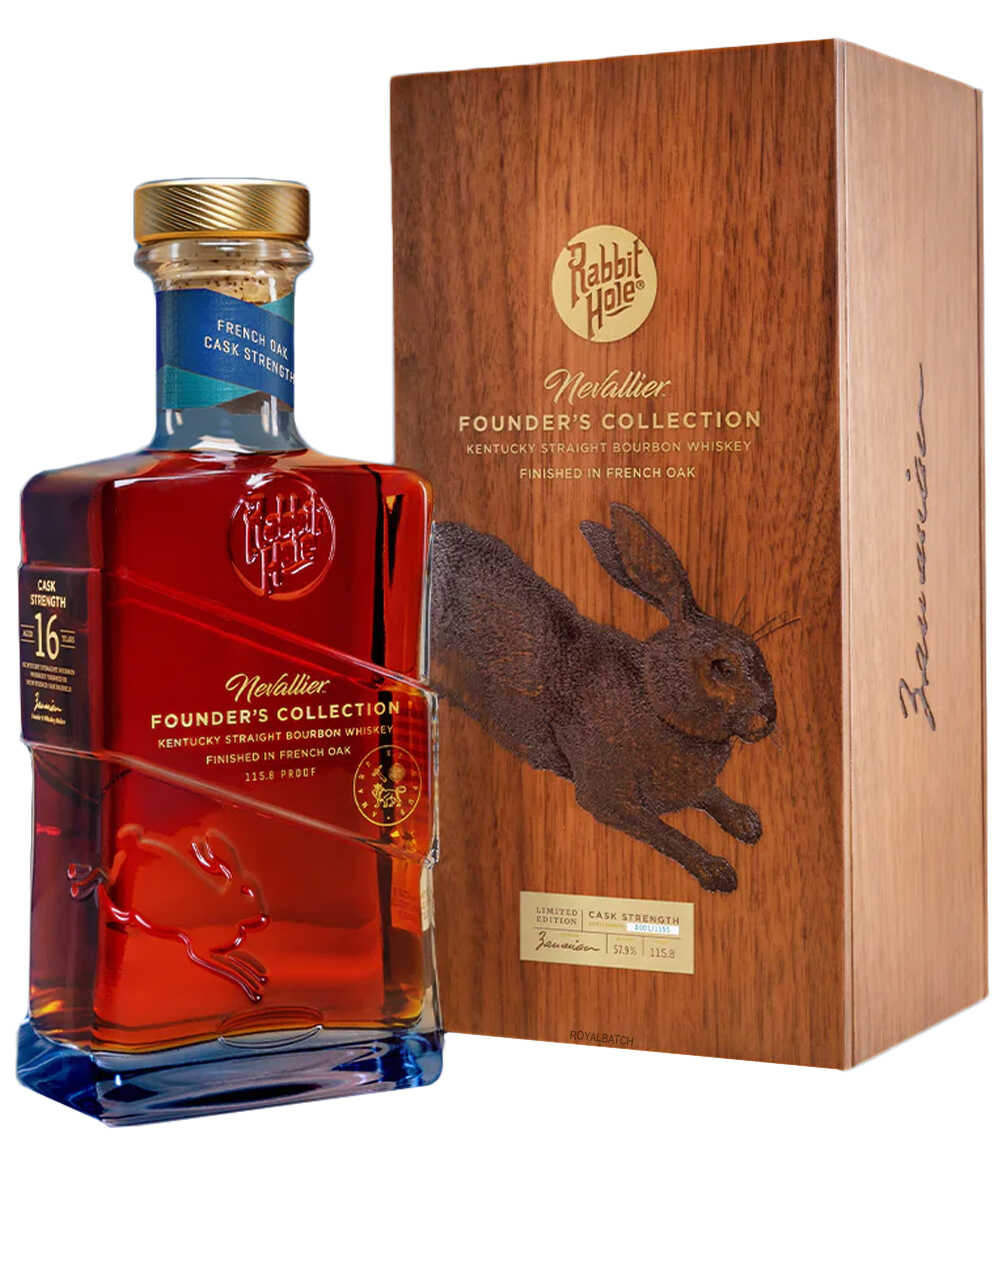 Rabbit Hole Nevallier Founders Collection 16 Year Old Kentucky Straight Bourbon Whiskey